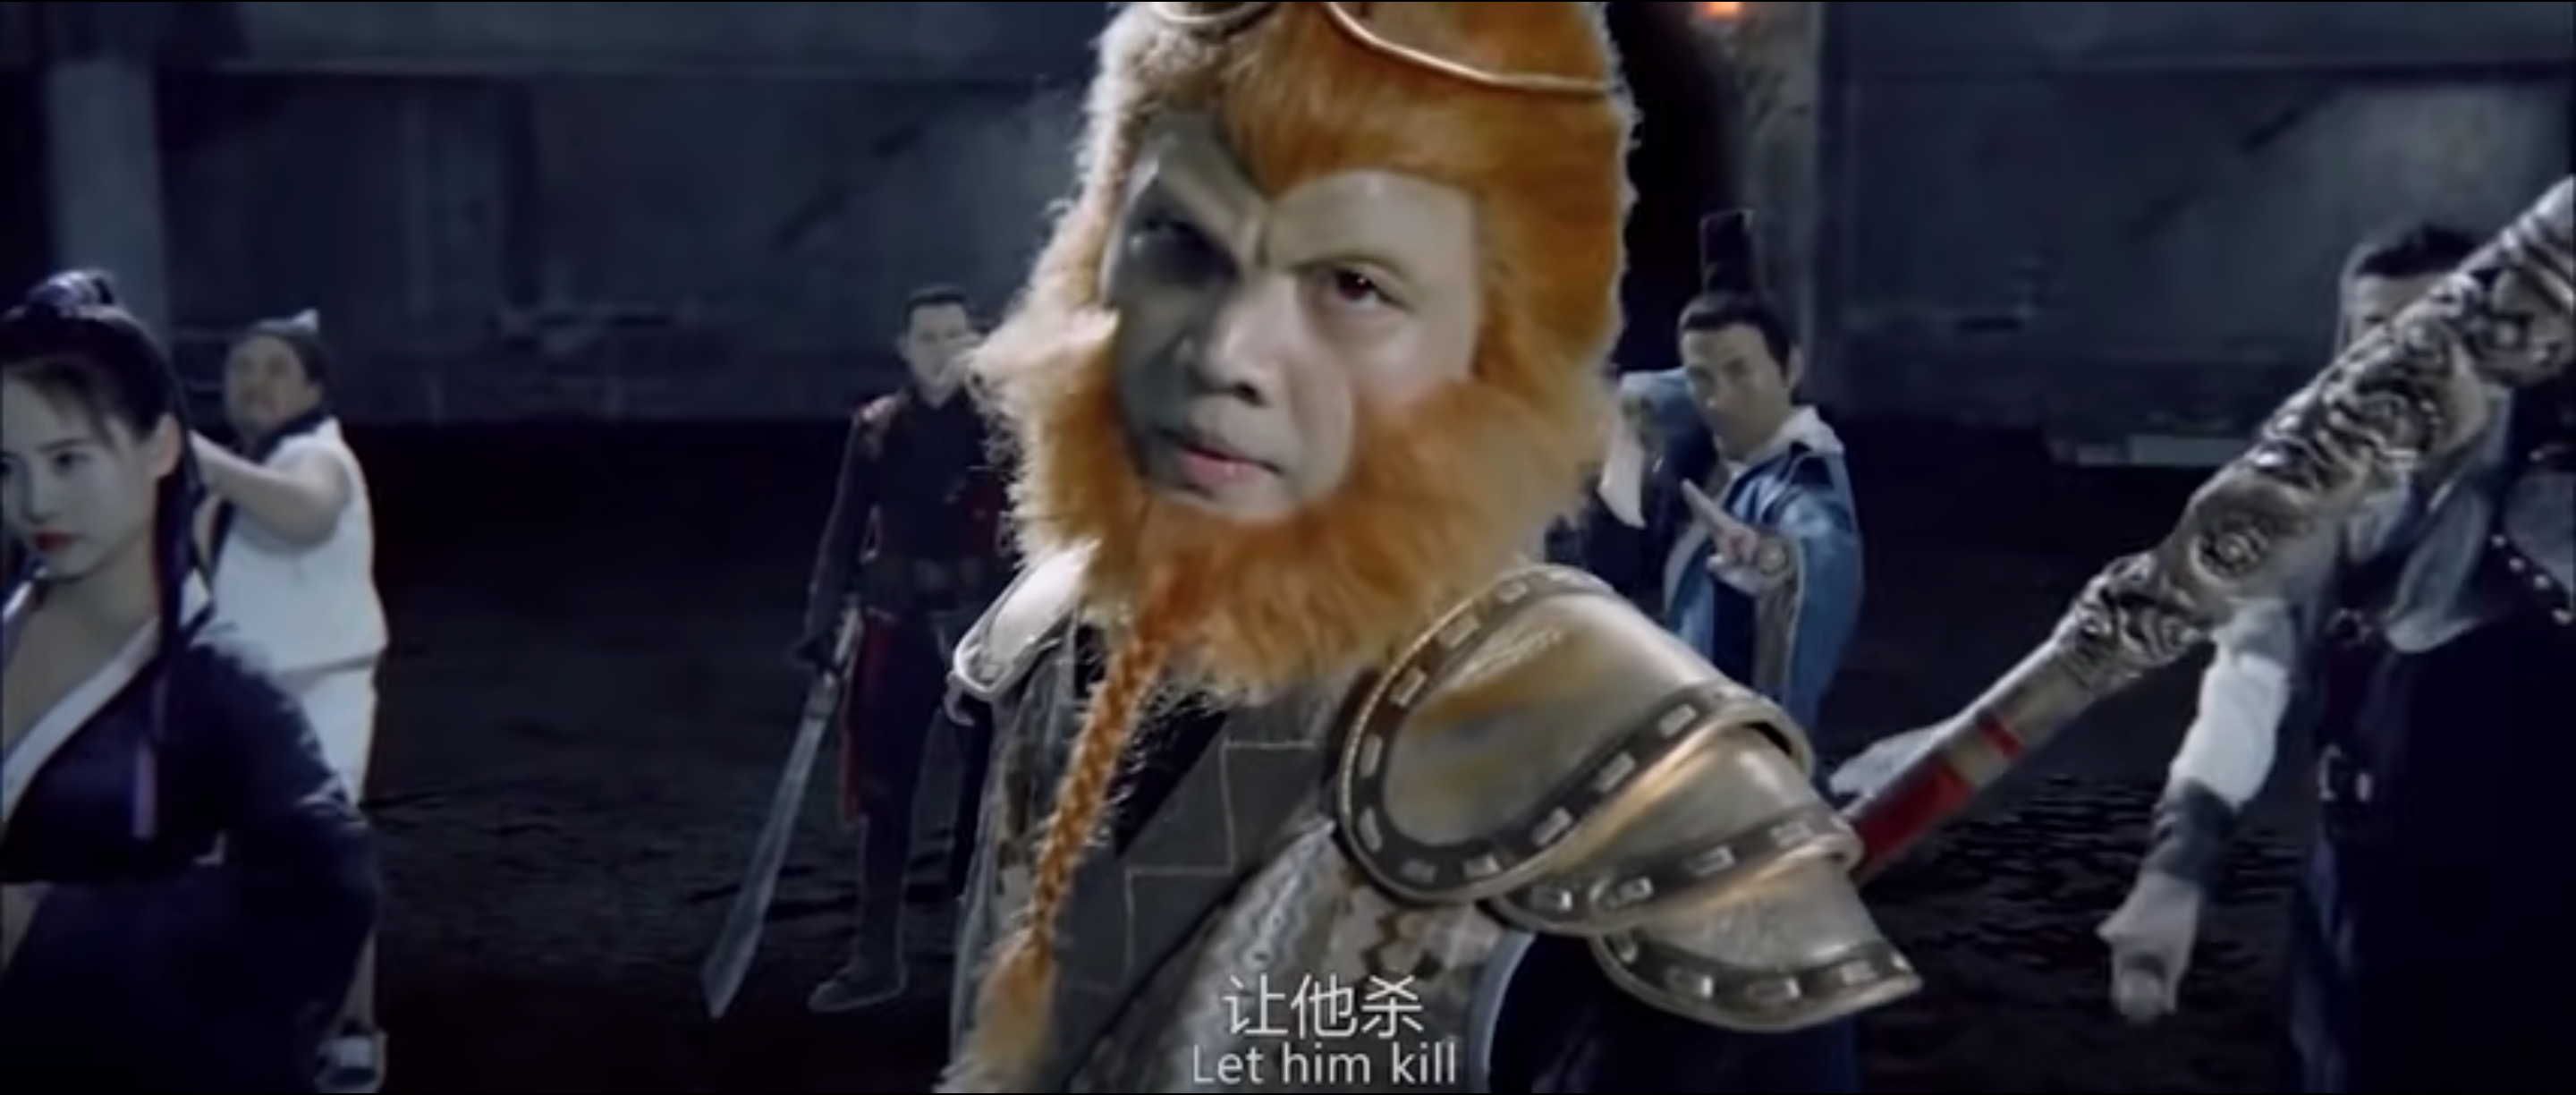 Image of the Monkey King in China Captain